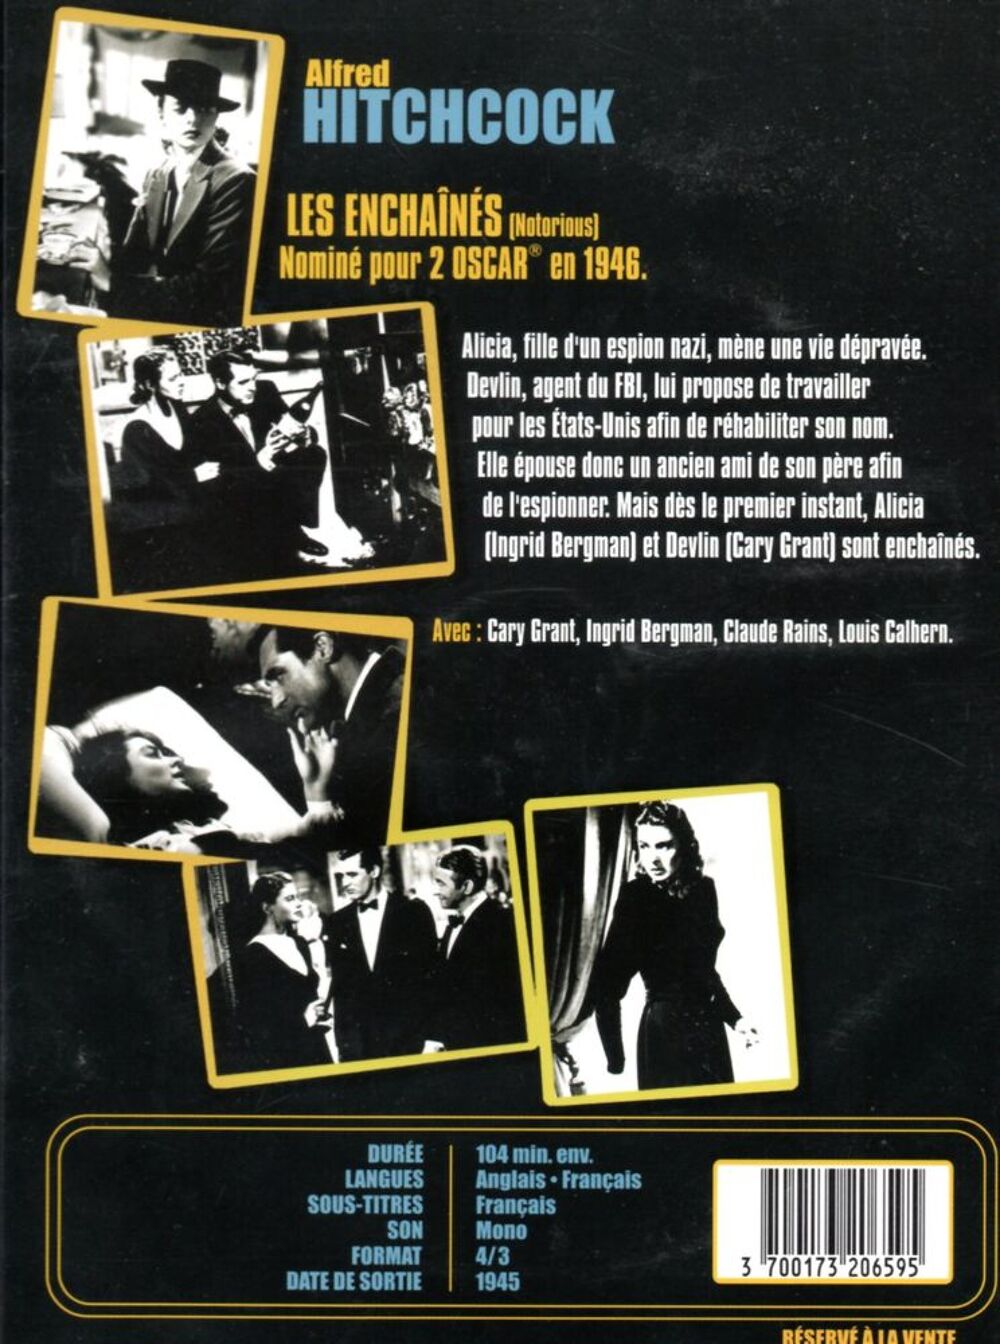 LES ENCHAINES HITCHCOCK format DVD DVD et blu-ray